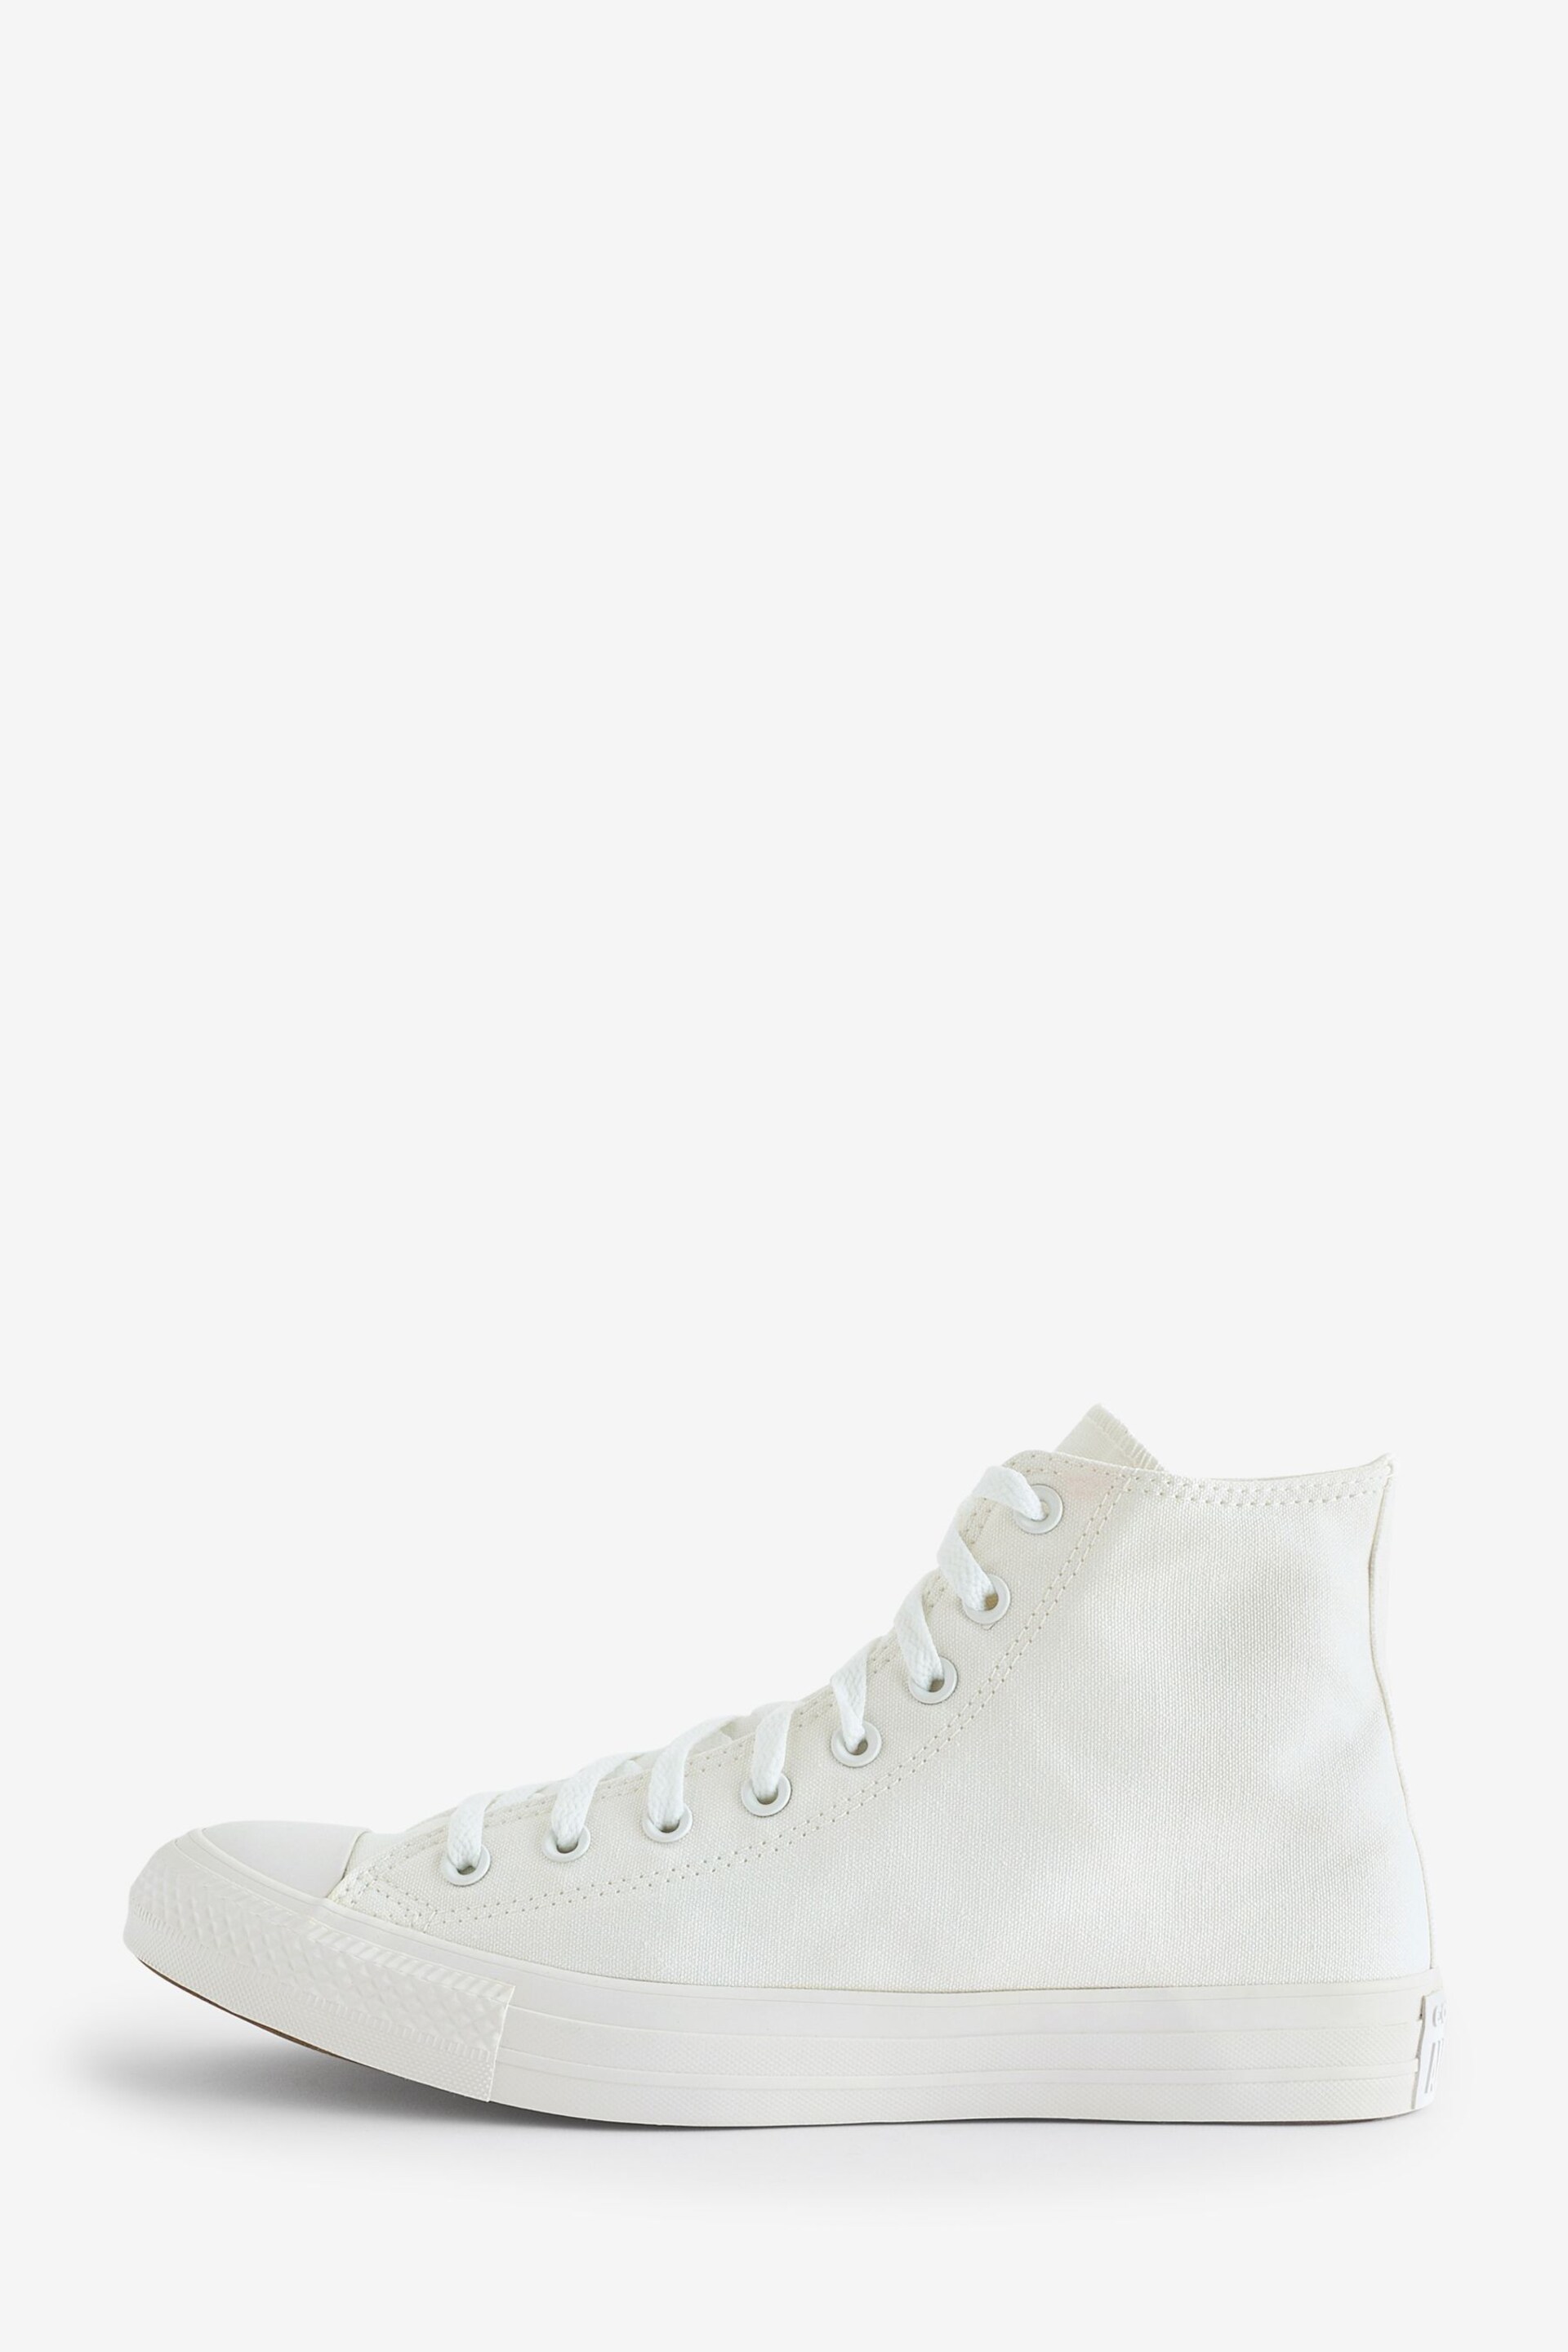 Converse White Chuck High Trainers - Image 2 of 9